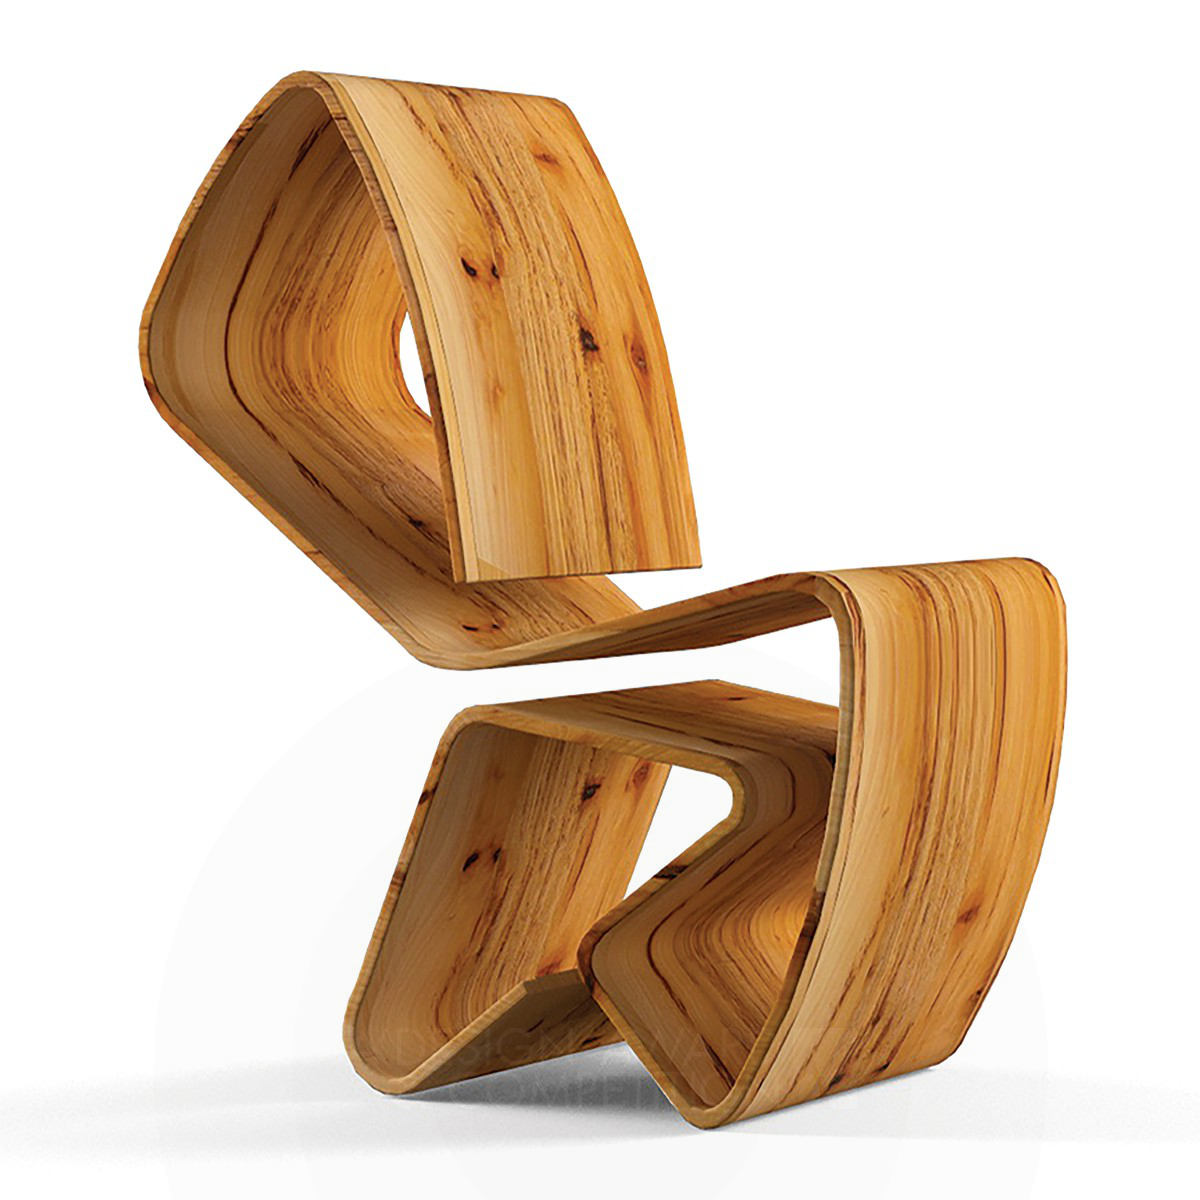 Suanni <b>Multifunctional Chair